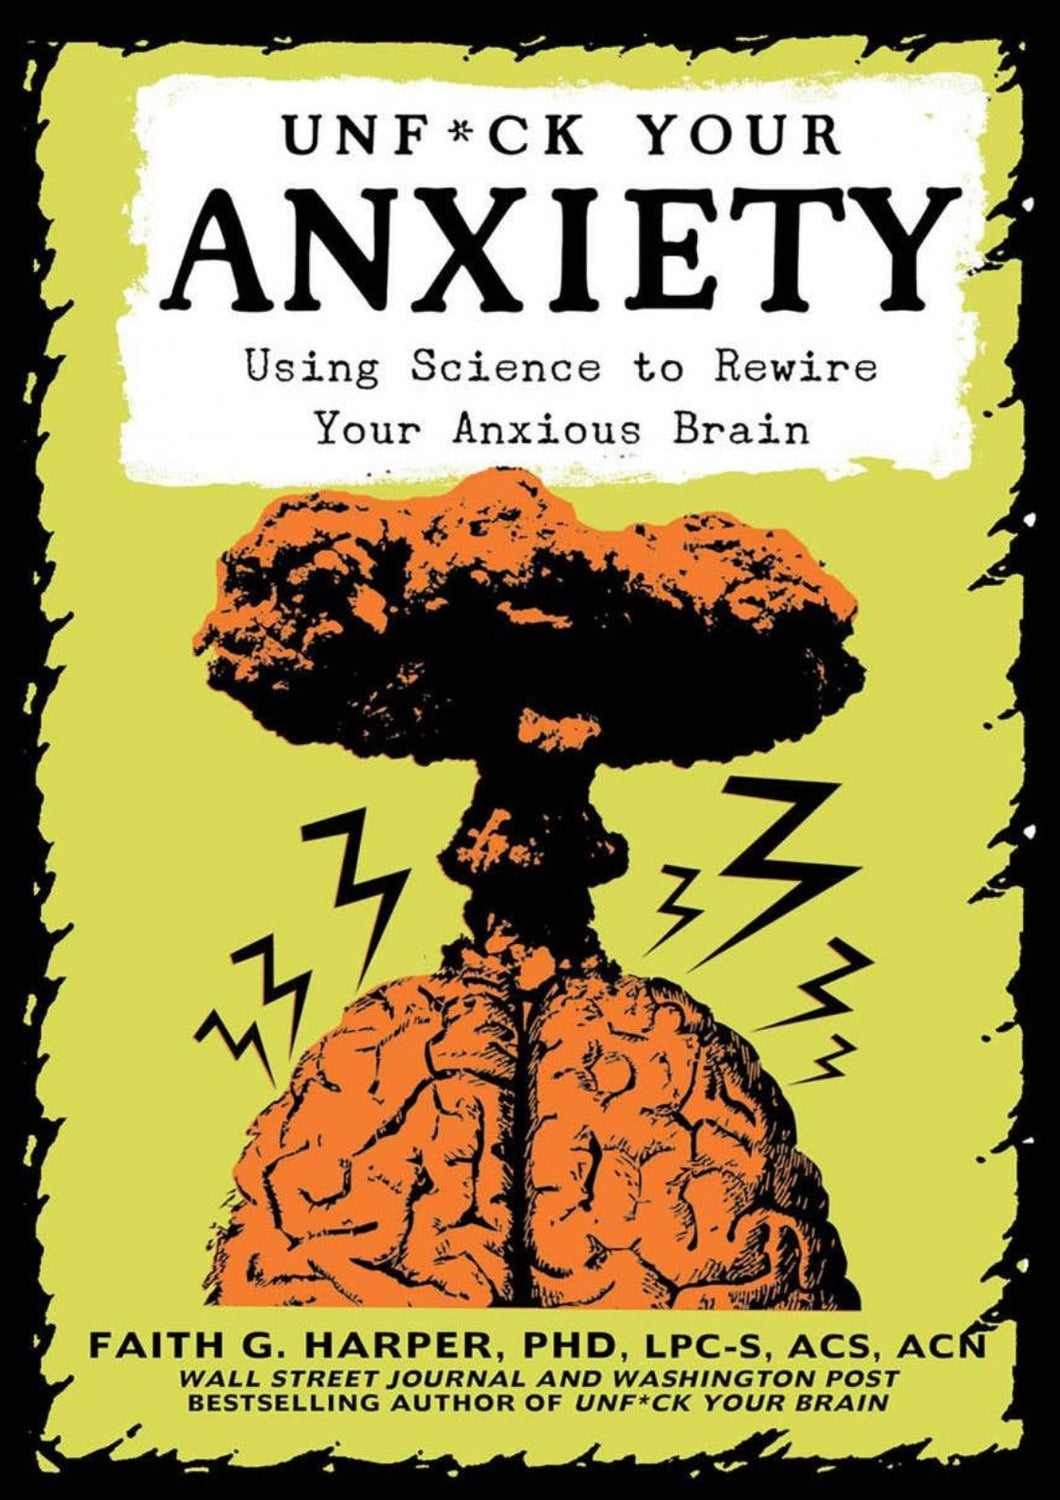 Unf*ck Your Anxiety: Science to Rewire Your Anxious Brain - Good Judy (.com)